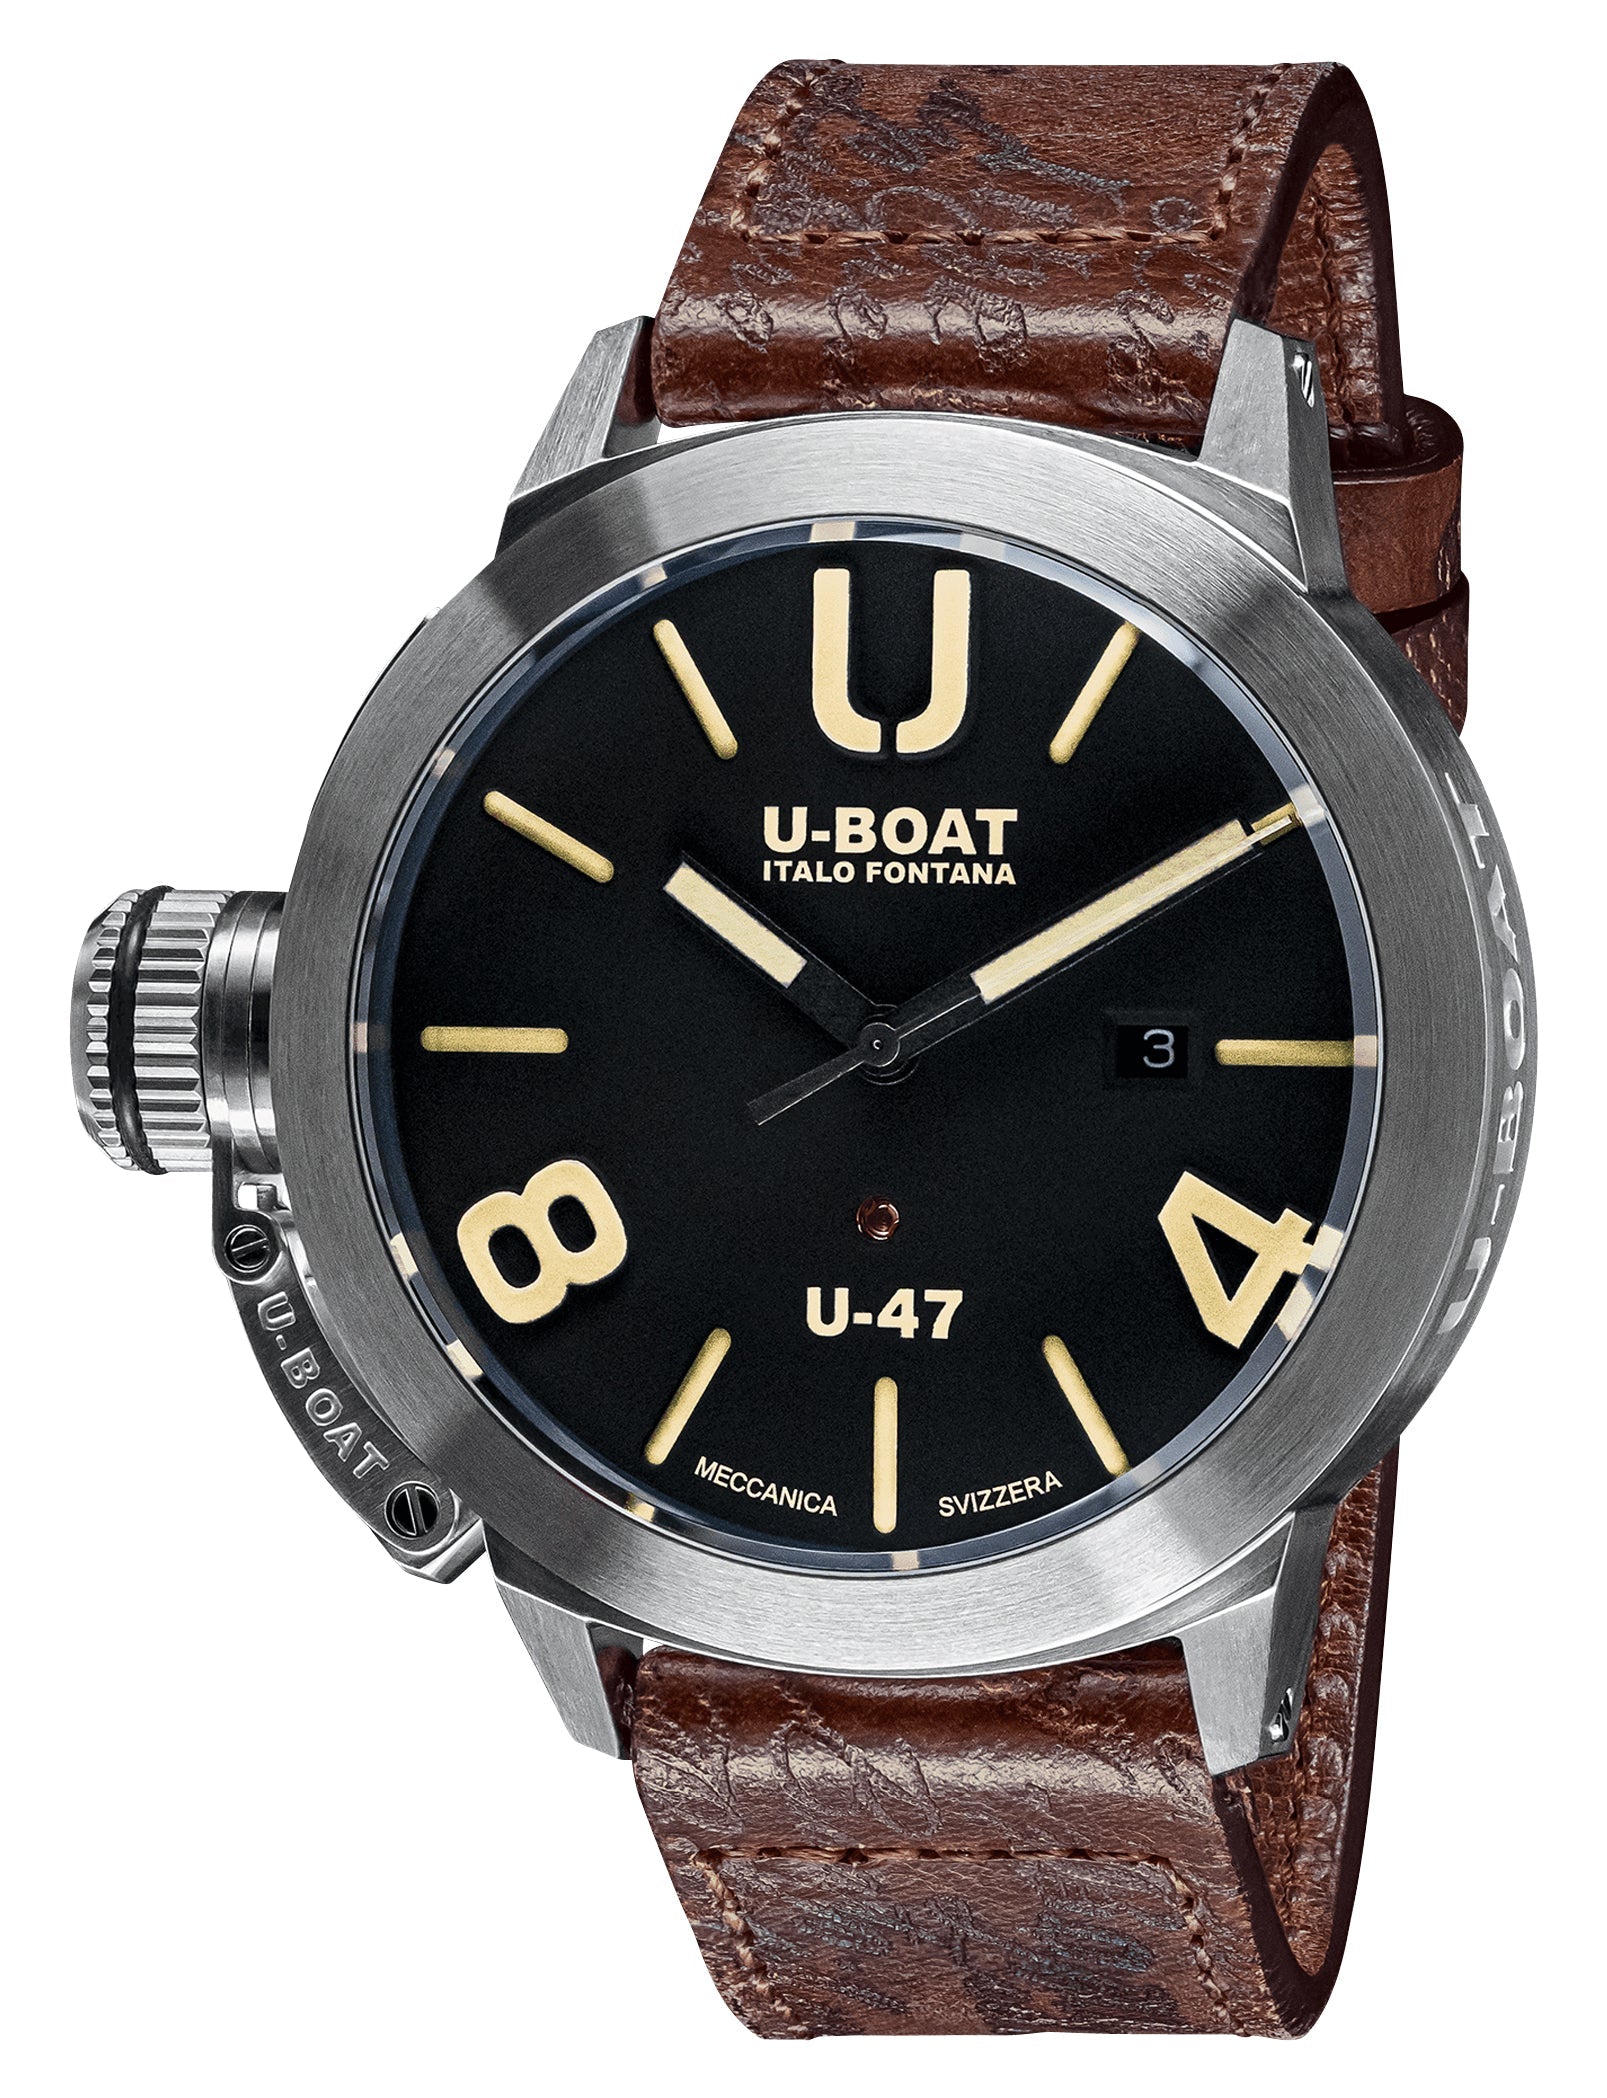 update alt-text with template Watches - Mens-U-Boat-8105-45 - 50 mm, black, Classico U-47, date, leather, mens, menswatches, new arrivals, round, rpSKU_7797, rpSKU_8106, rpSKU_8898, rpSKU_8899, rpSKU_8900, stainless steel case, swiss automatic, U-Boat, watches-Watches & Beyond